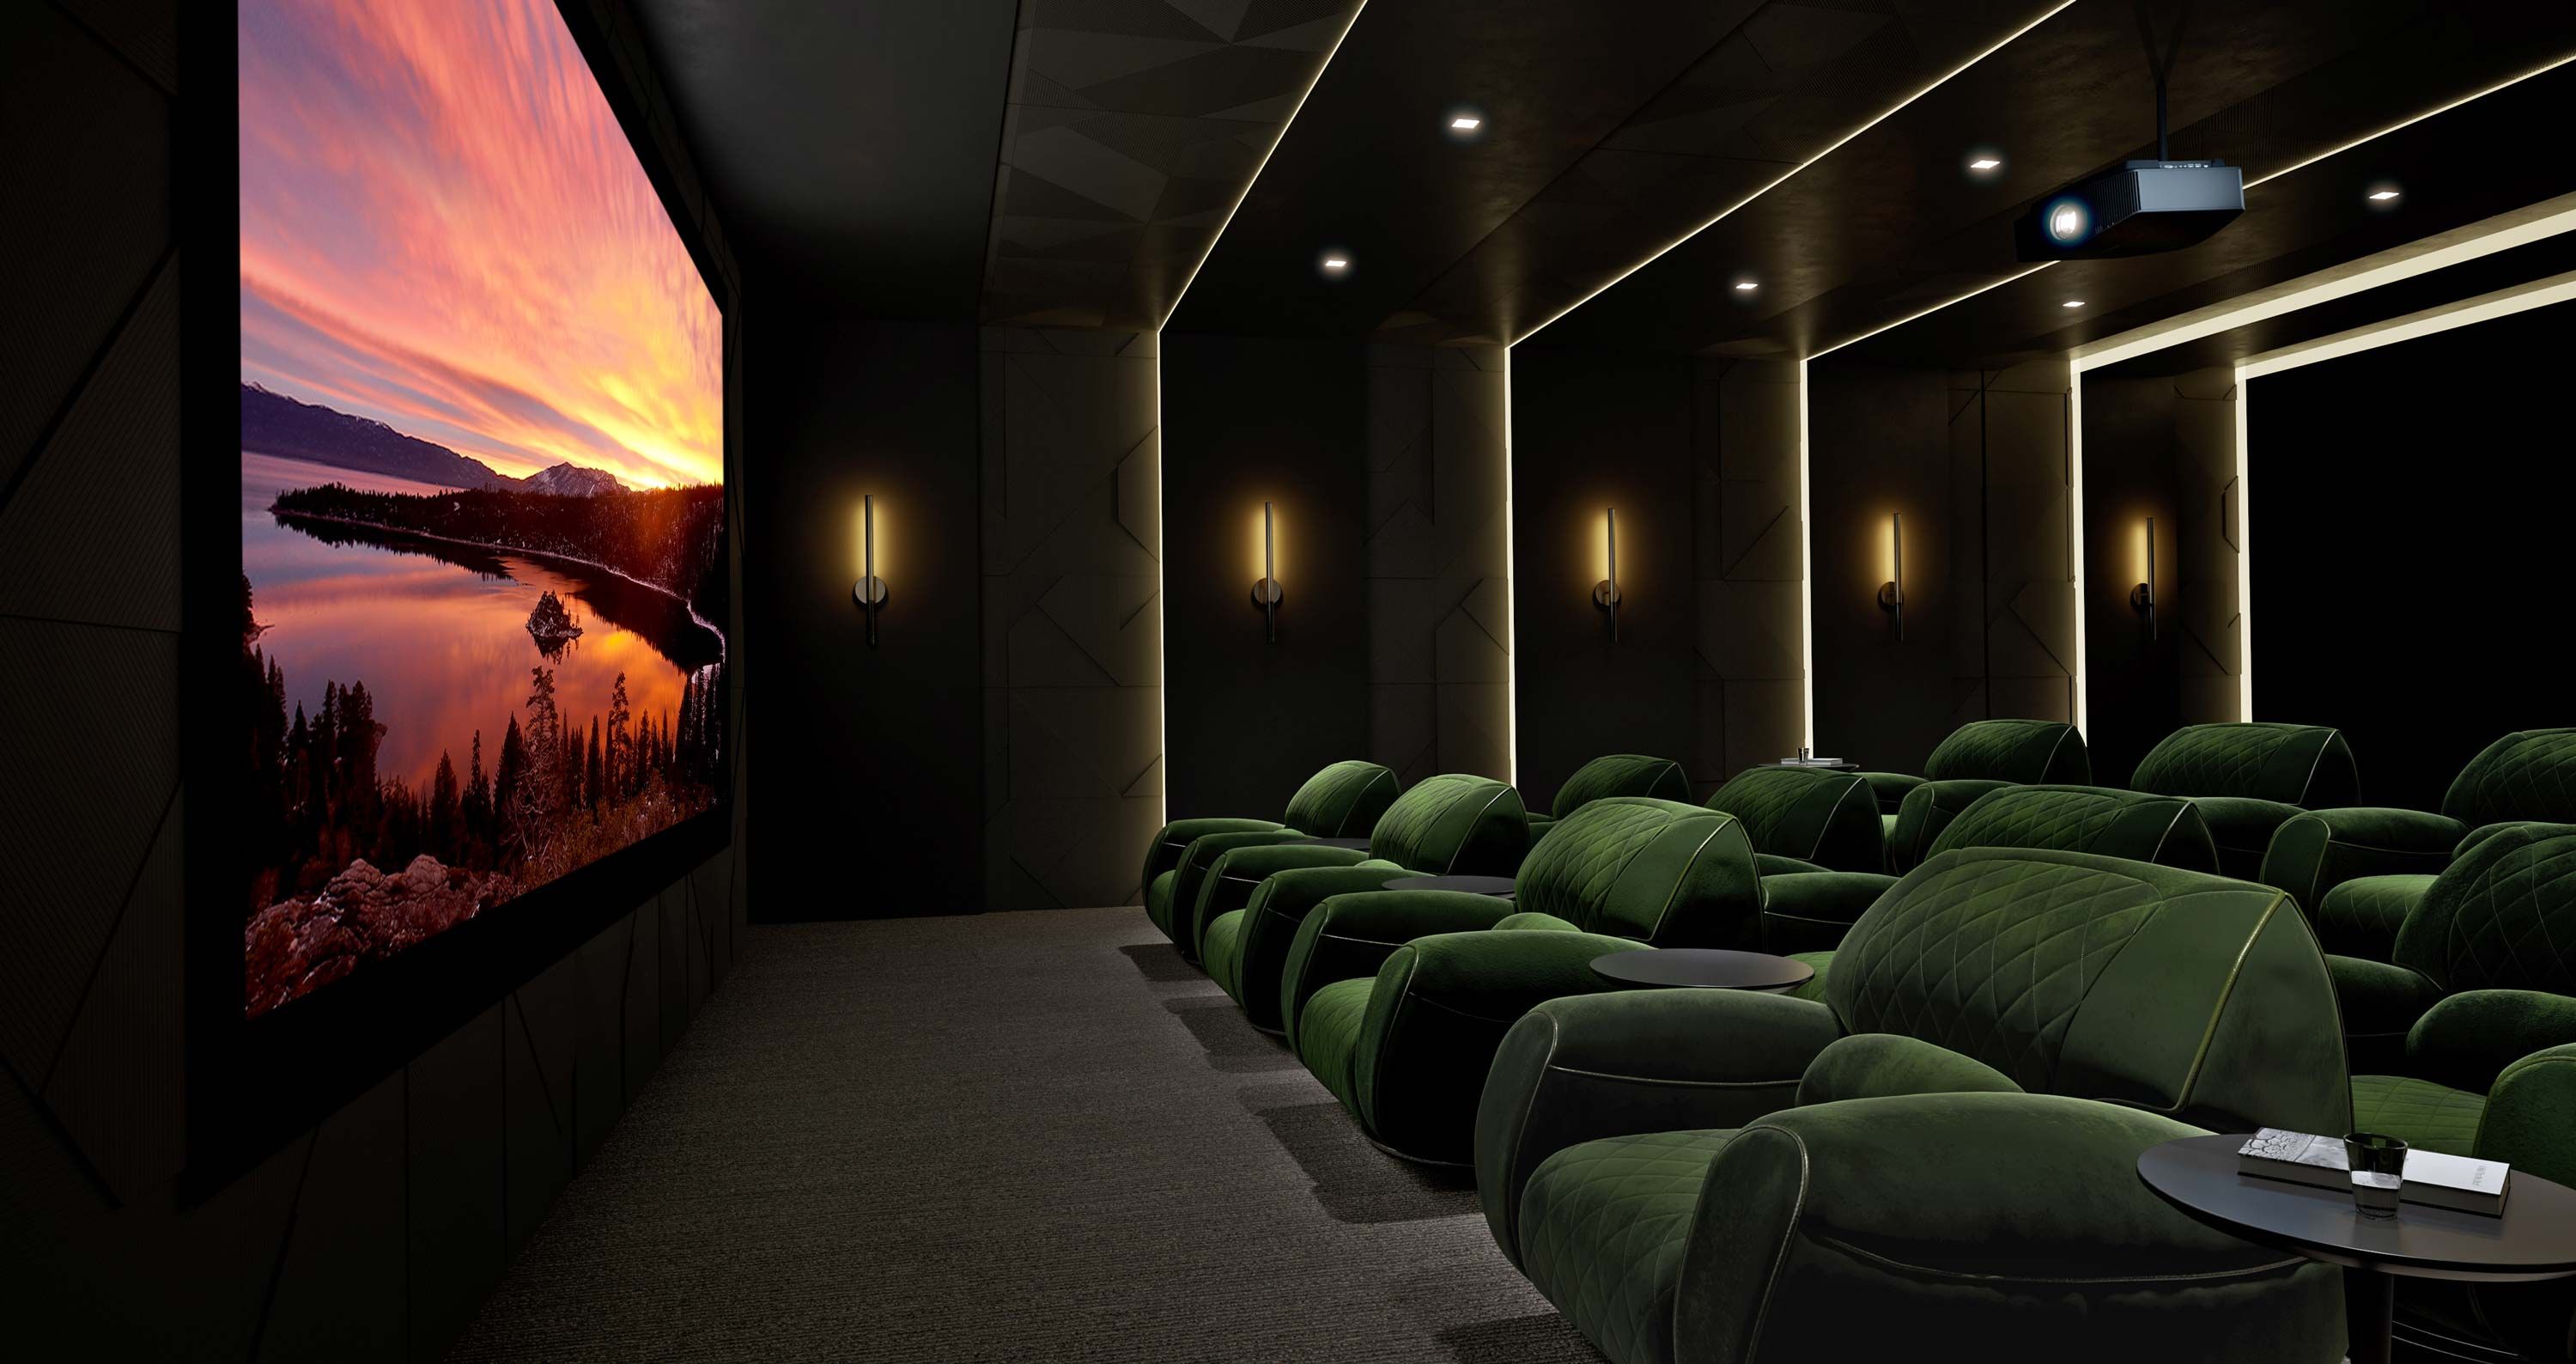 sony home theater with emerald seating and sunset scene on screen